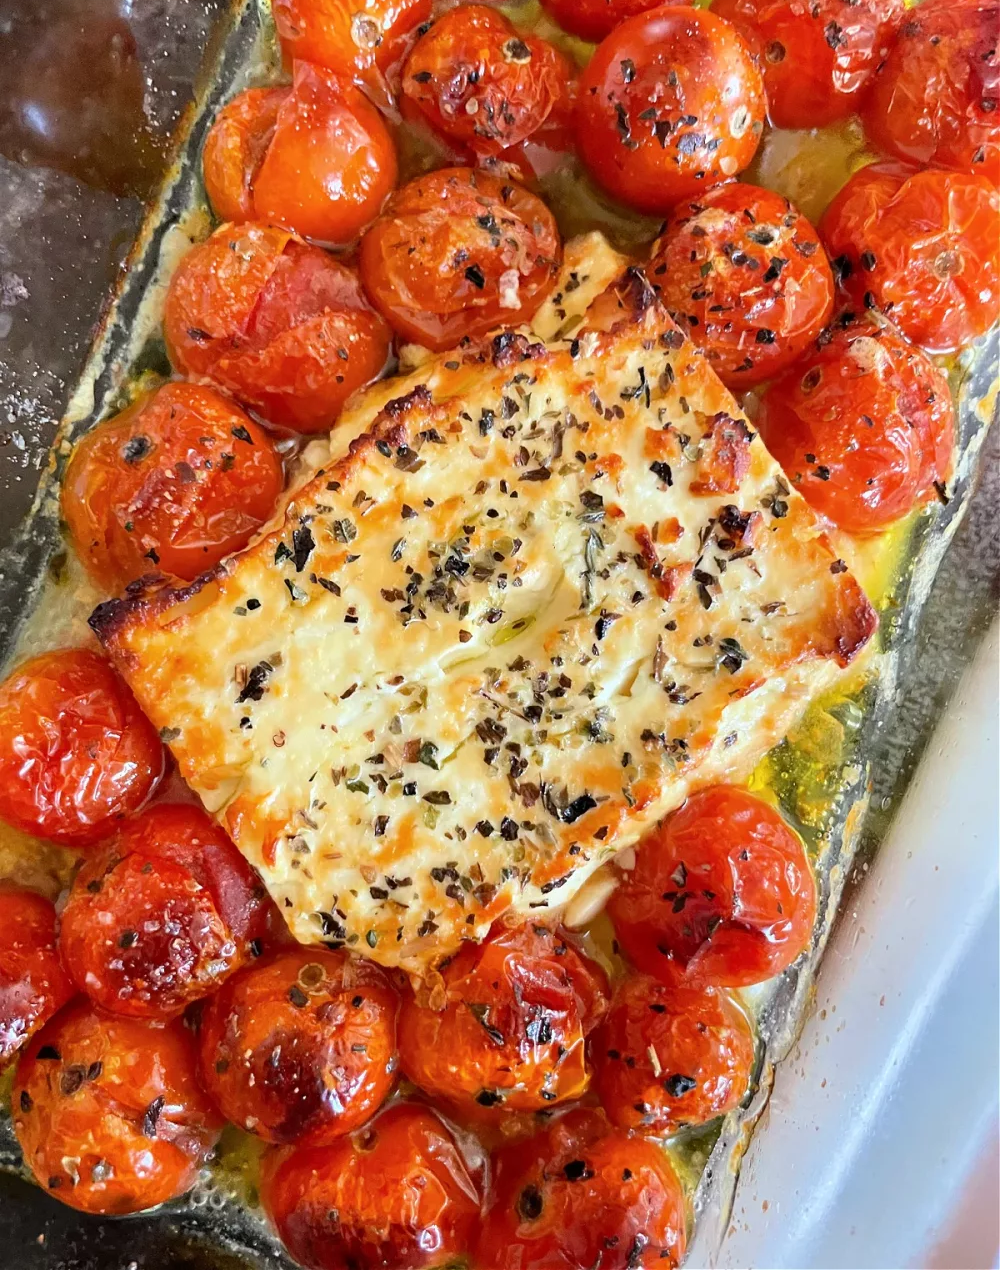 casserole dish filled with cherry tomatoes and brick of feta covered in italian seasonings